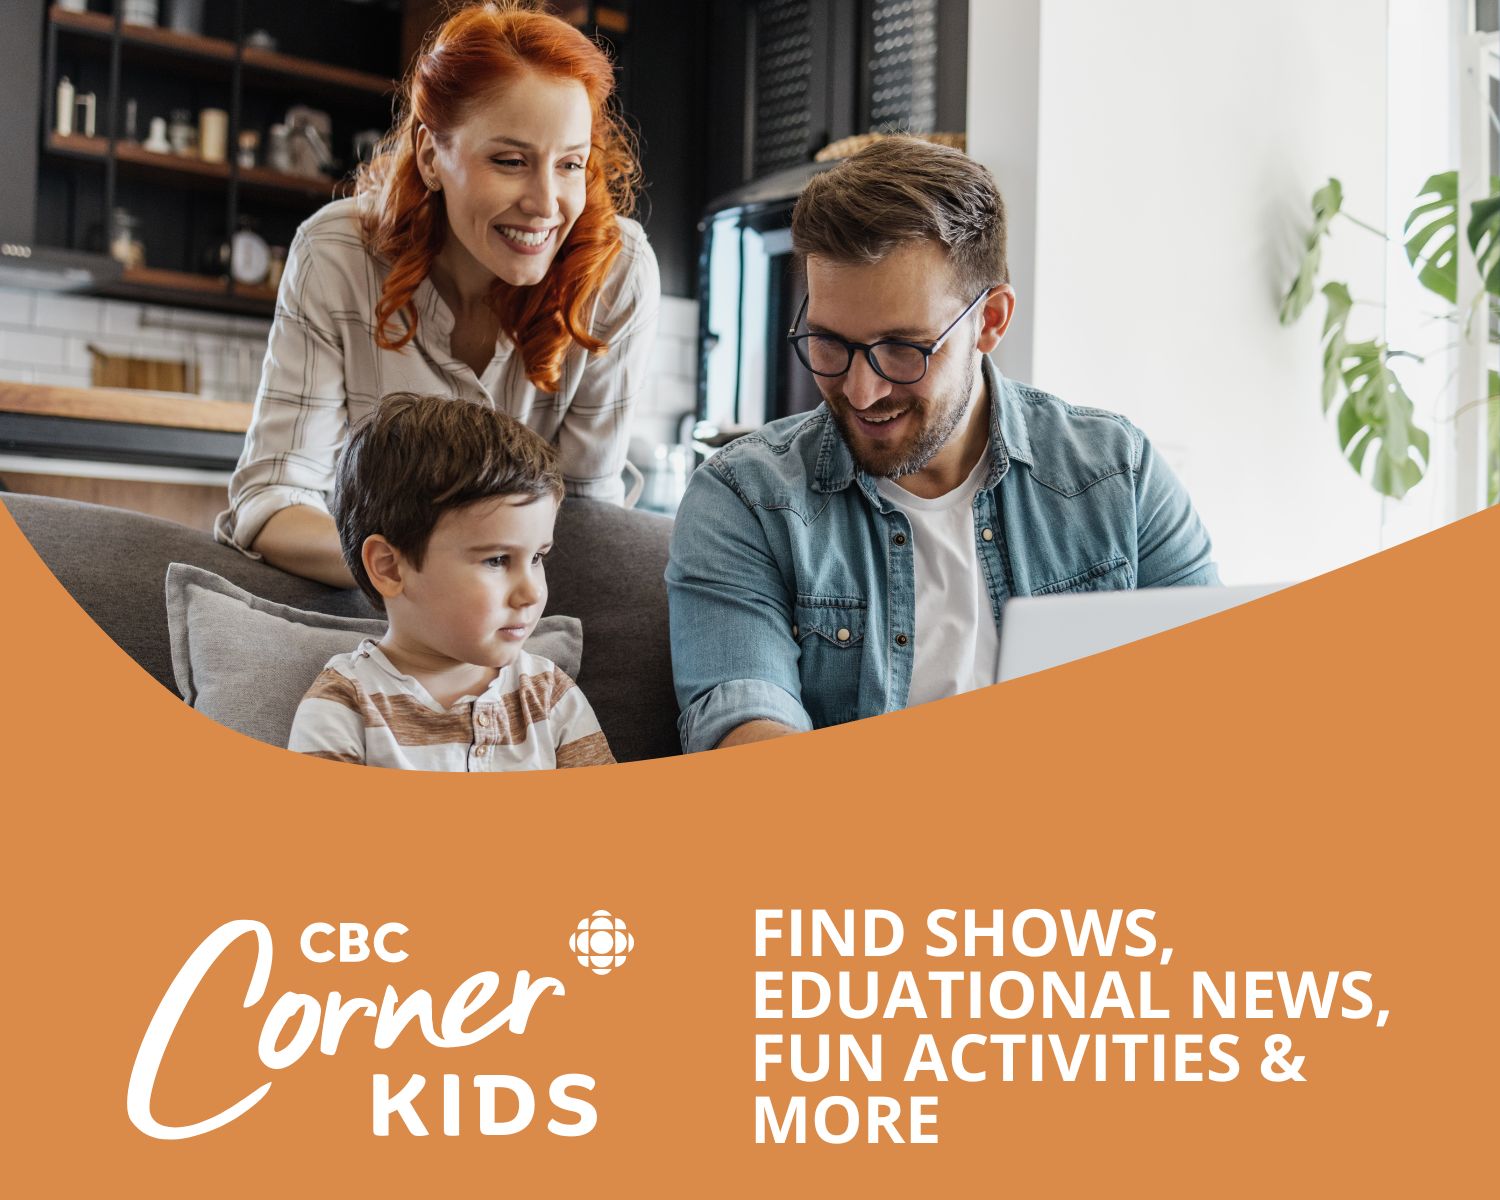 CBC Corner Kids: "Find shows, educational news, fun activities and more" - A family together looking at a laptop